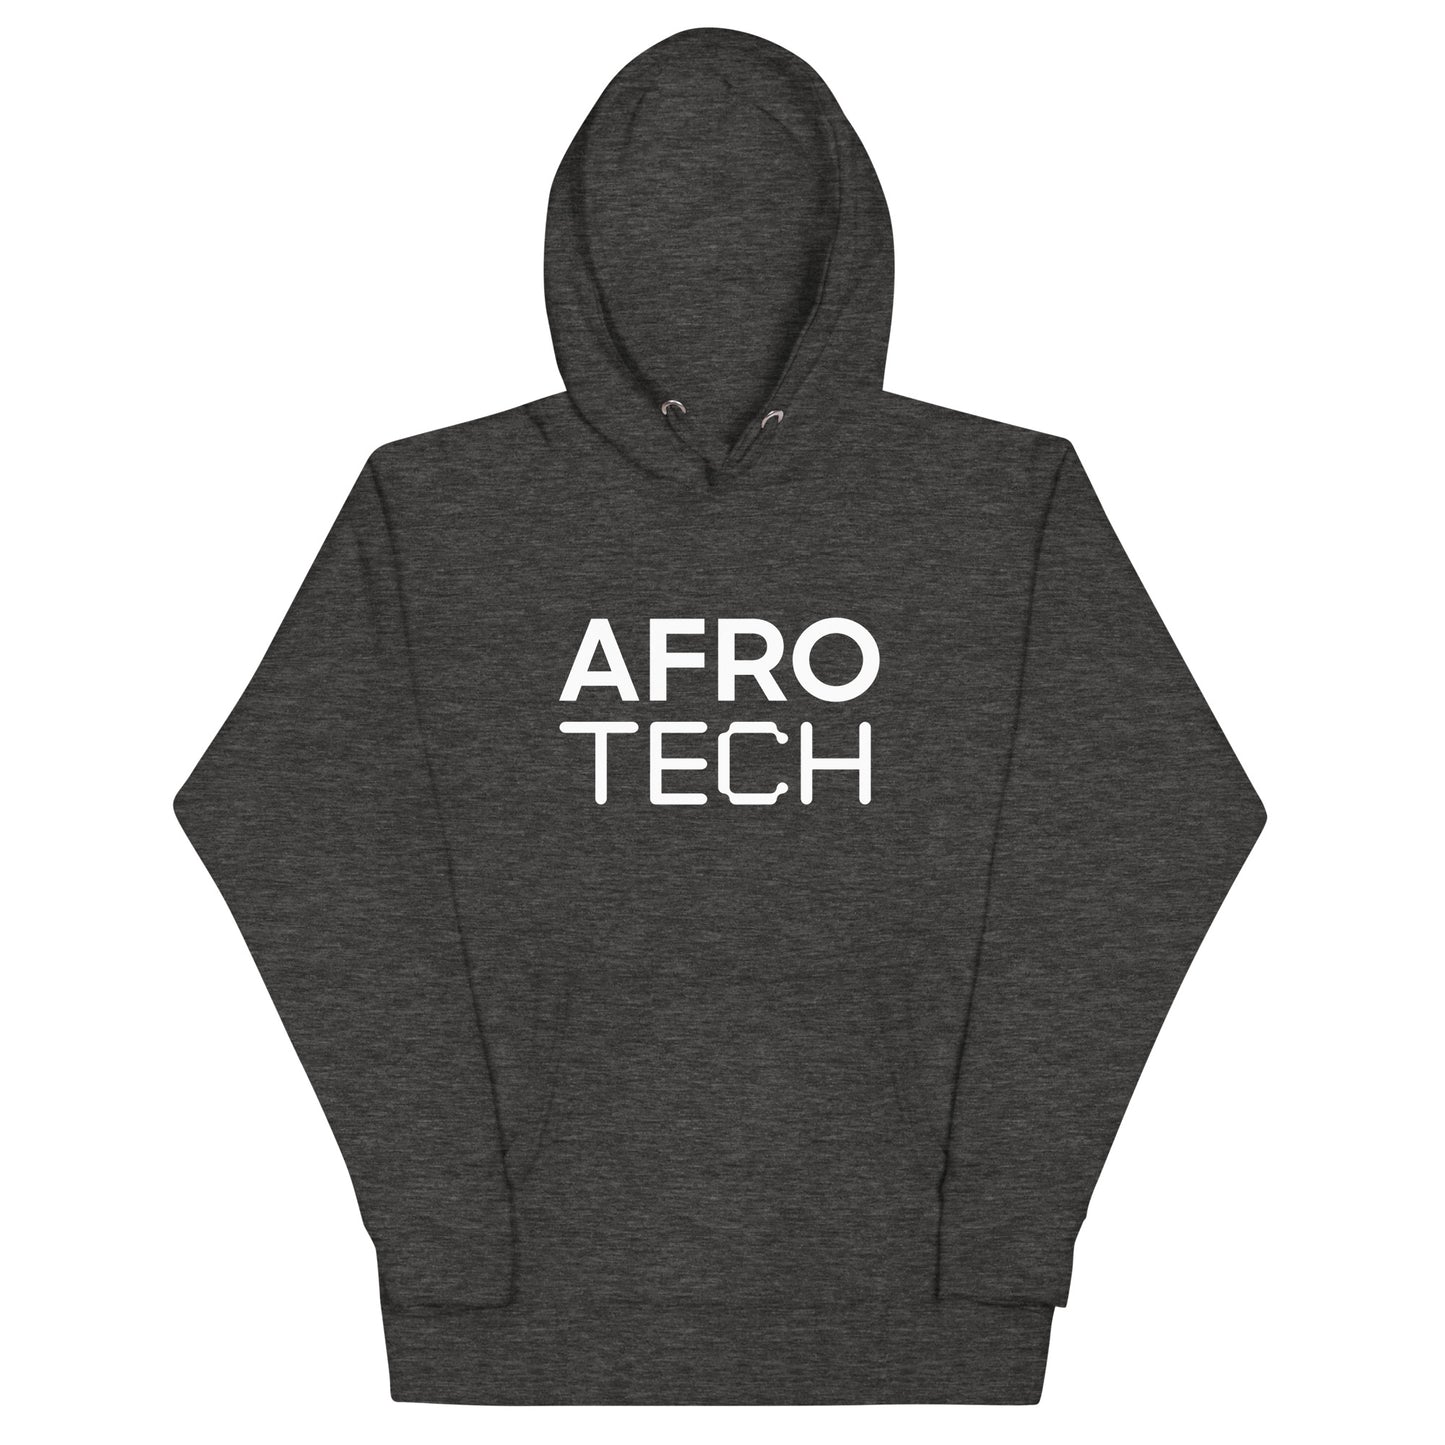 AfroTech '21 Unisex Hoodie